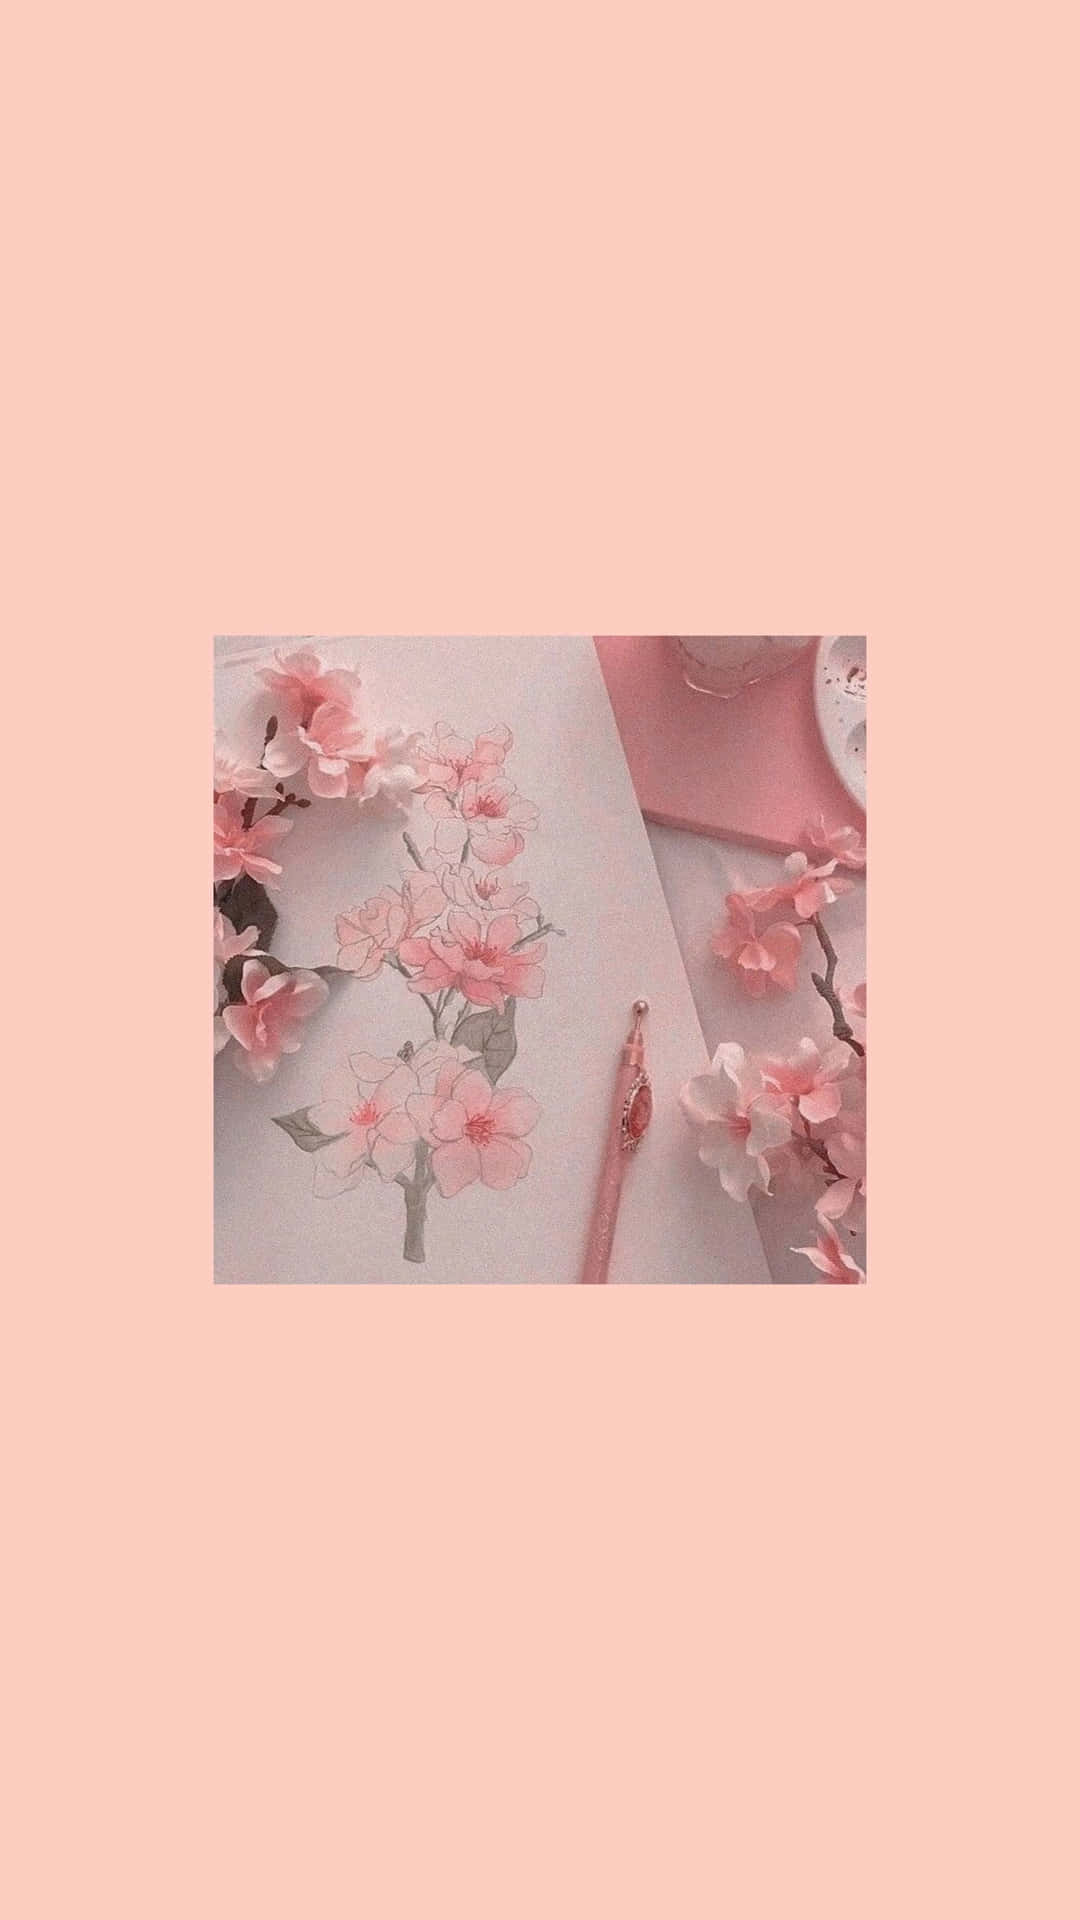 Refresh and relax with the calm and soothing pastel pink aesthetic.